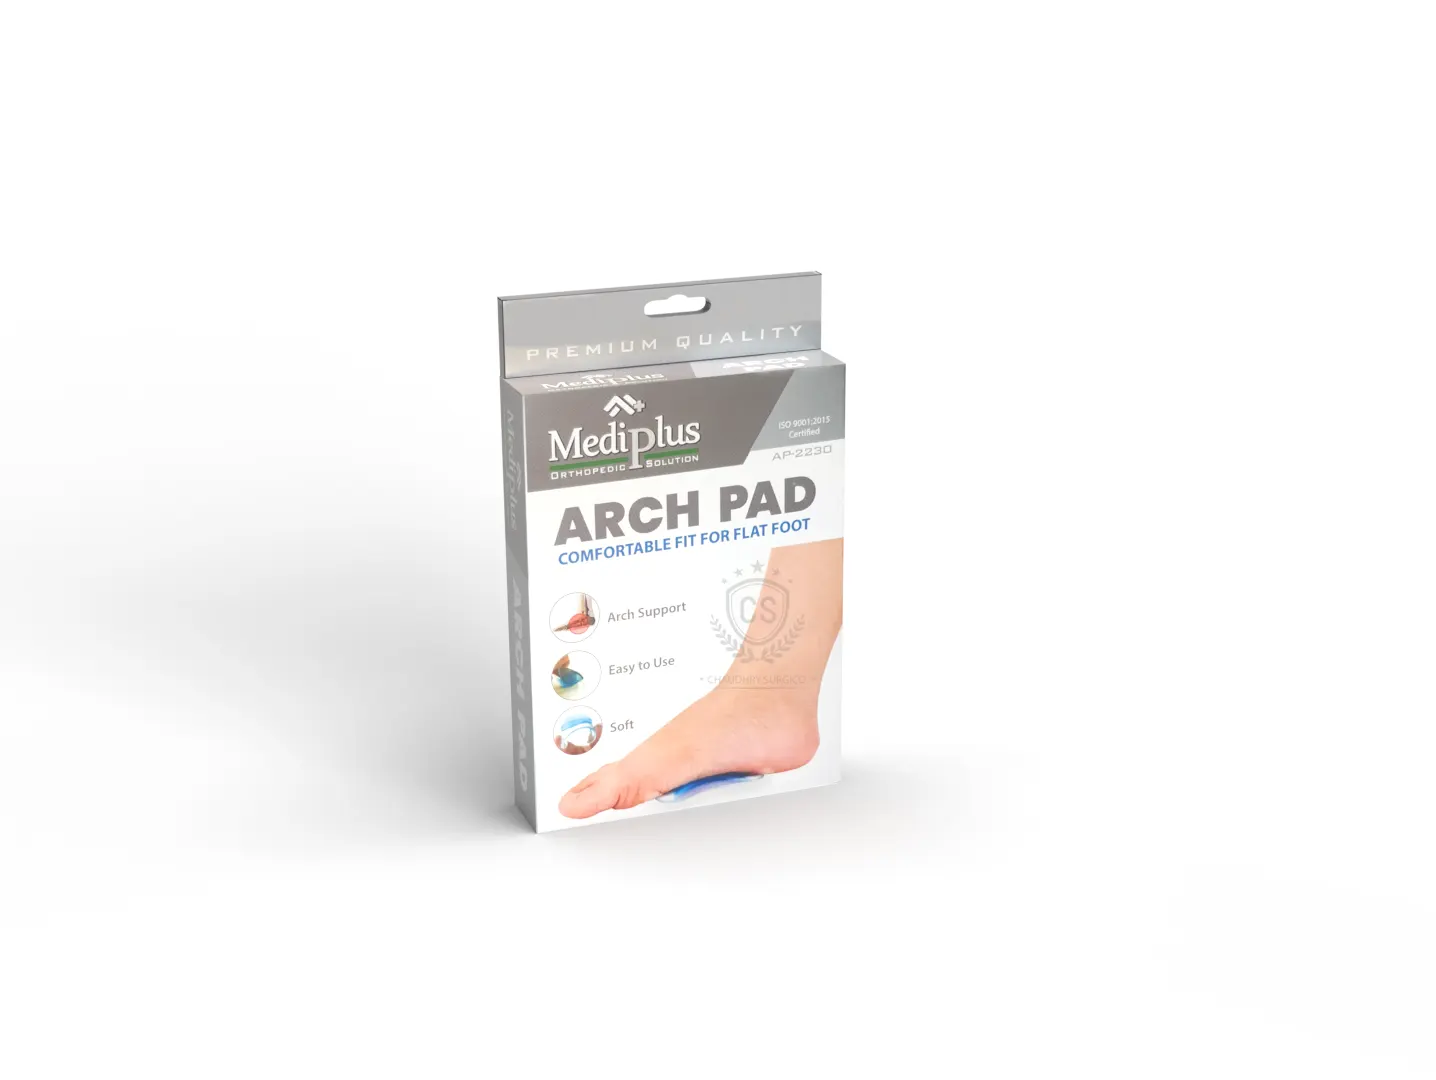 Mediplus Arch pads comfortably fit for flat foot